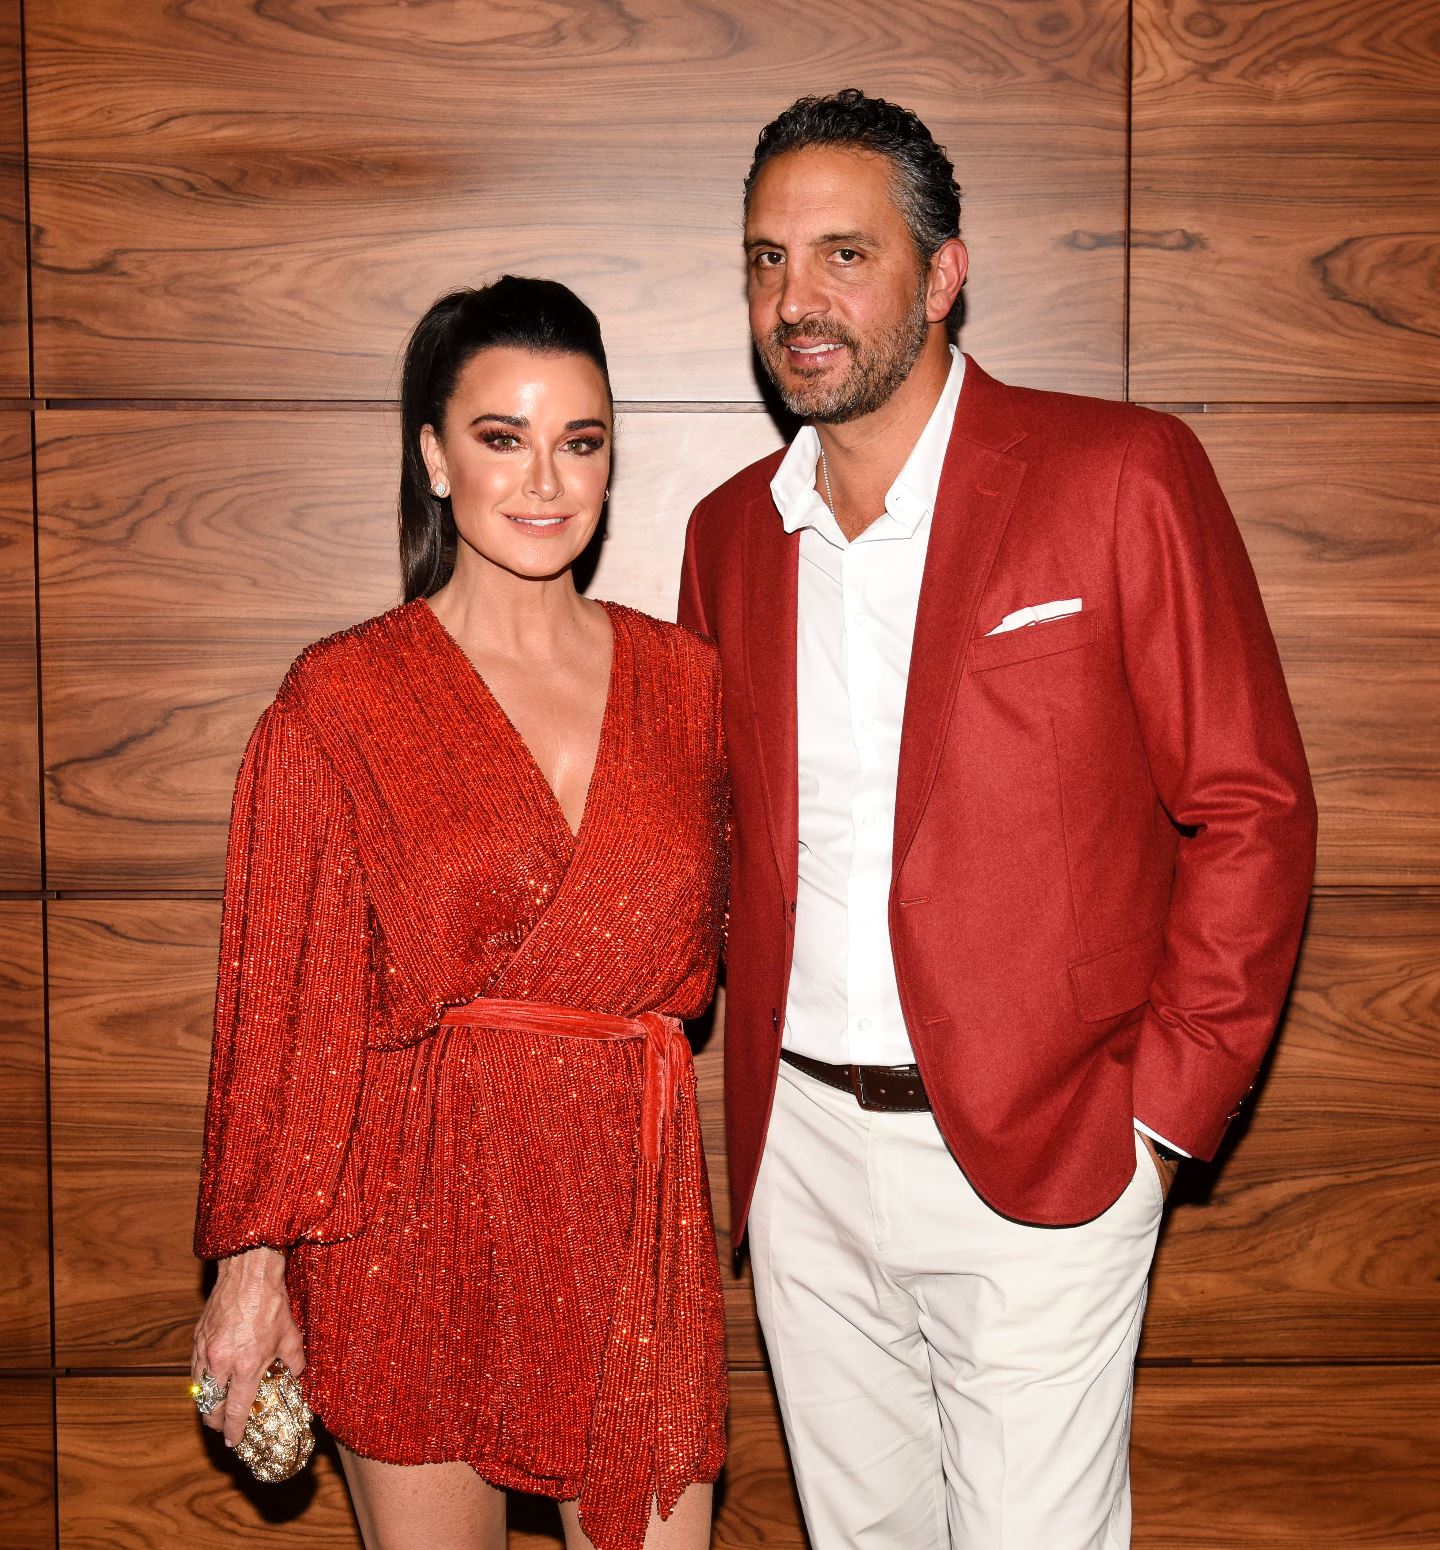 REPORT: Kyle Richards and Mauricio Are "[Pushing] Each Other’s Buttons" Amid Split as RHOBH Star Kyle Steps Out in Matching Cowboy Hats With Morgan Wade for Lunch With Kathy, See Pic